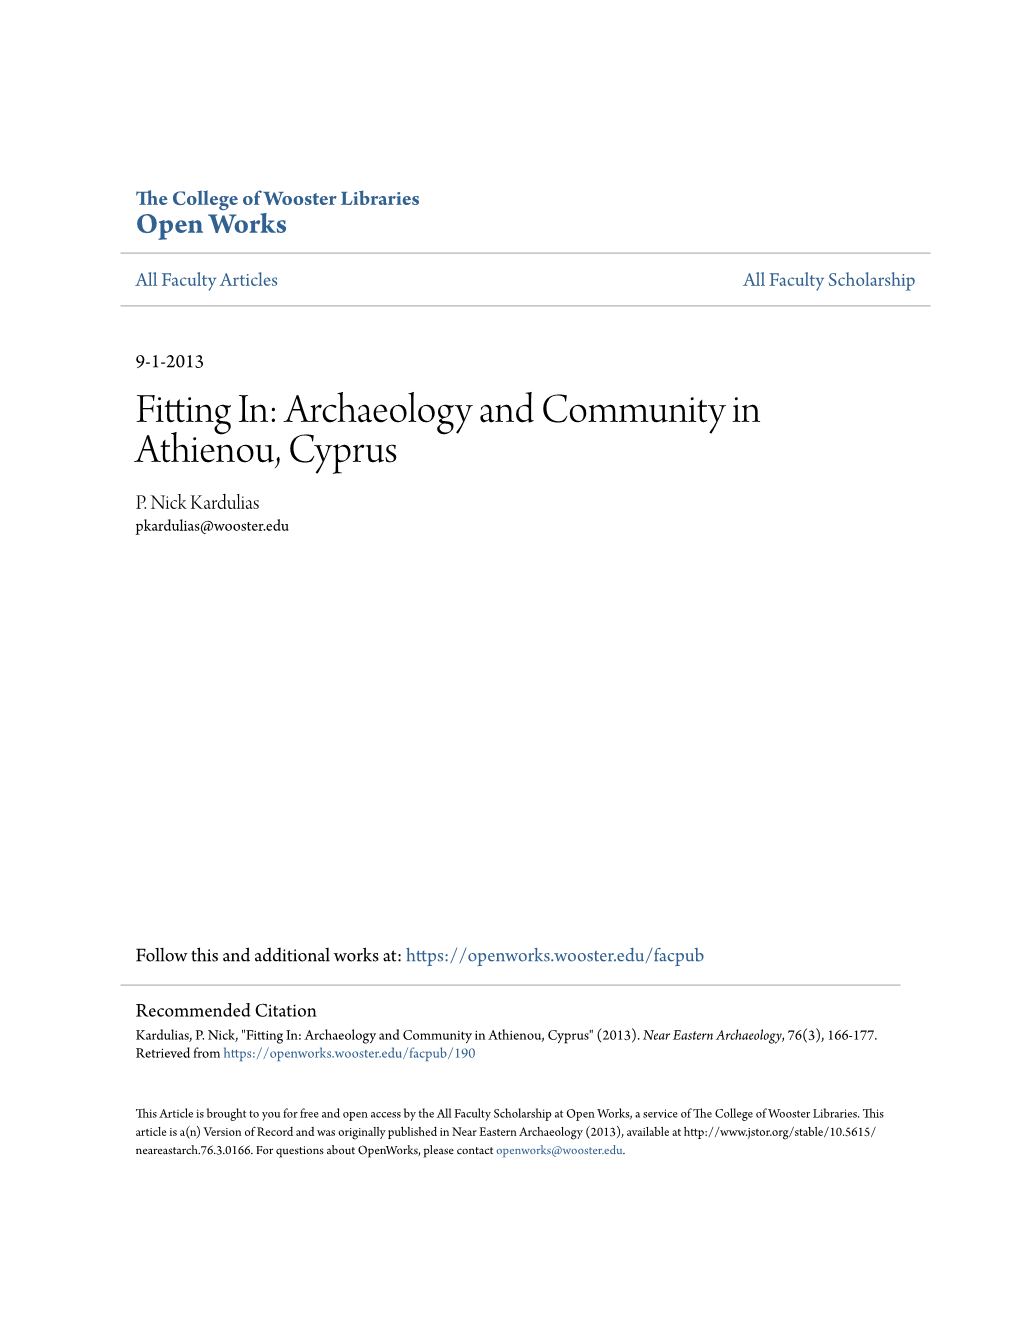 Archaeology and Community in Athienou, Cyprus P